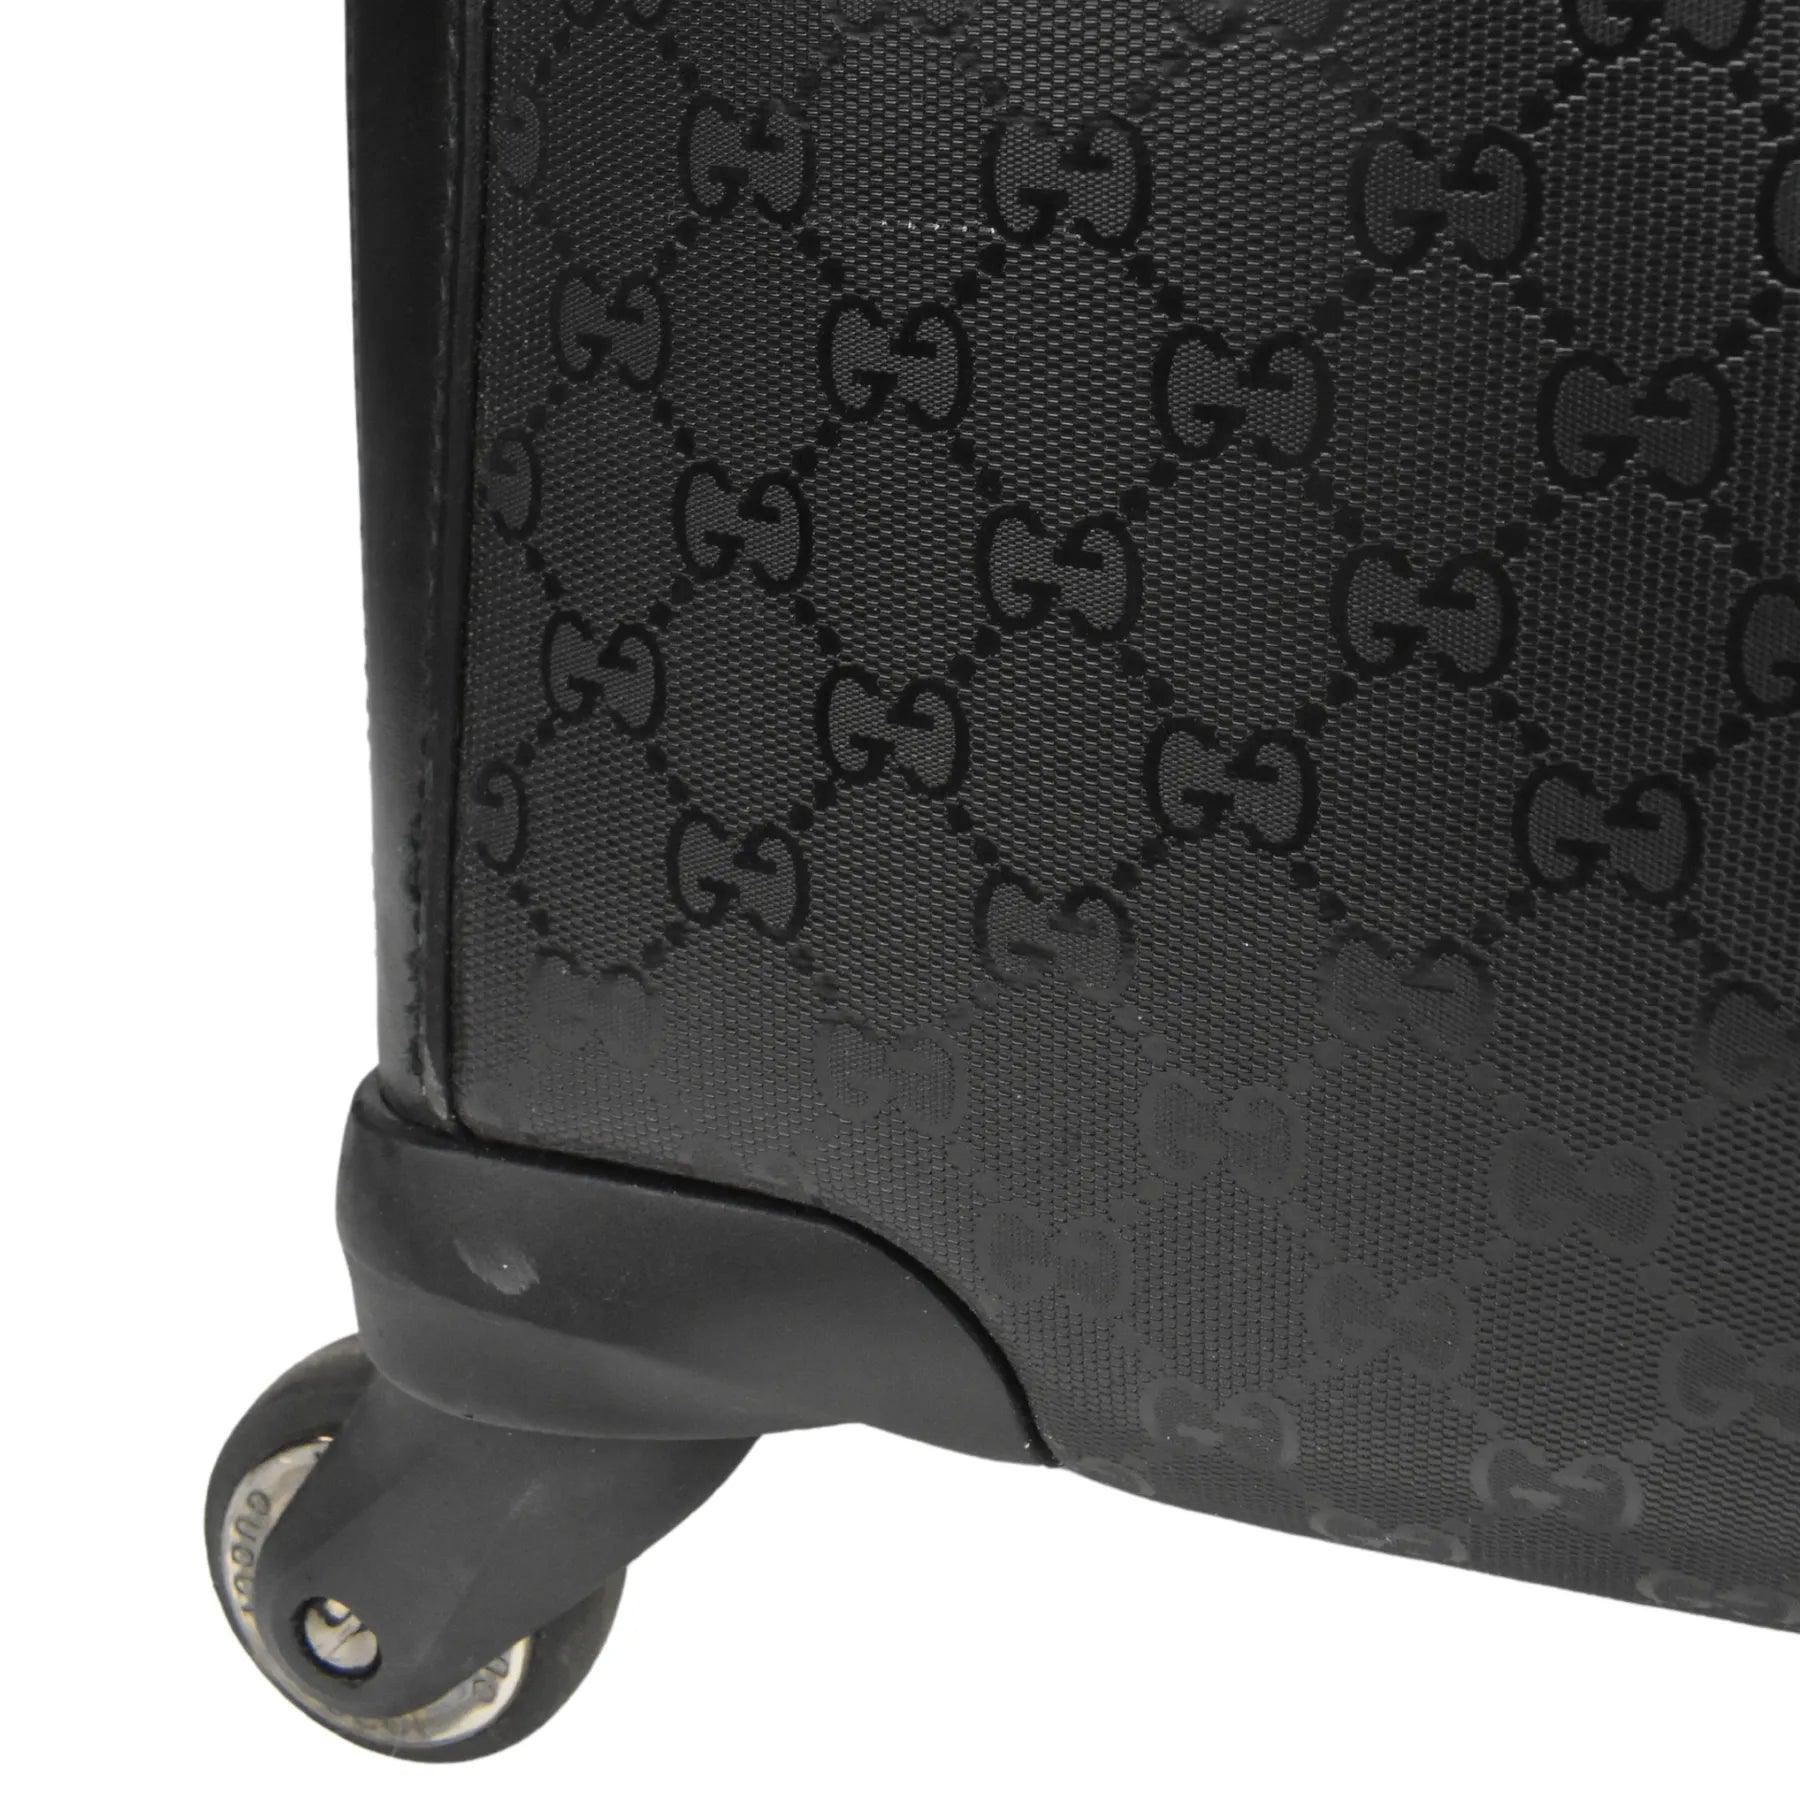 Gucci Carry on Luggage - Fashionably Yours